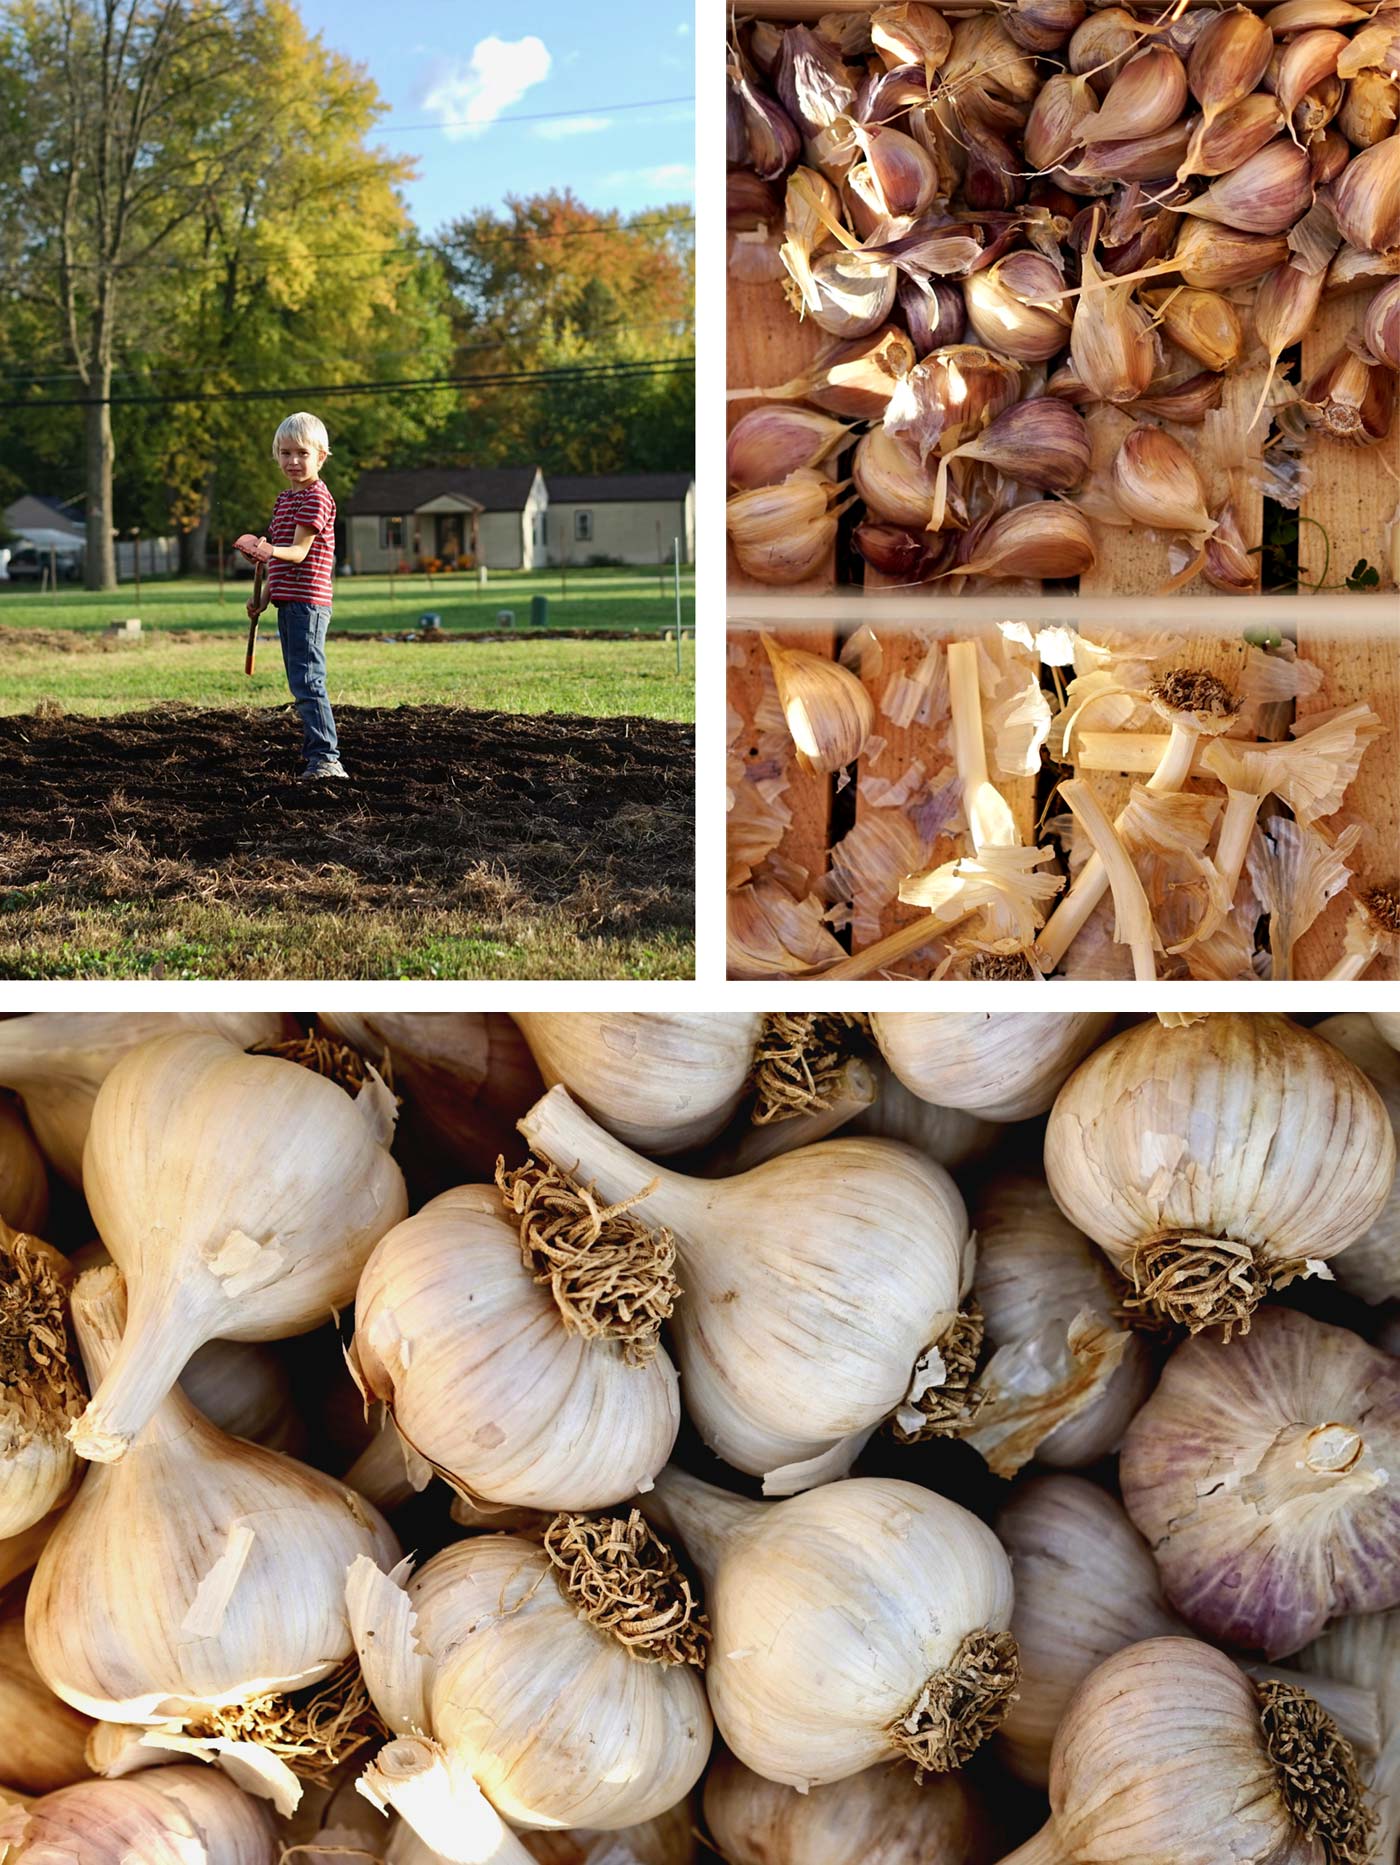 Top Left: Five-year-old Ian helps with the work. Top Right: The garlic bulbs are broken into cloves for planting. Bottom: Music garlic